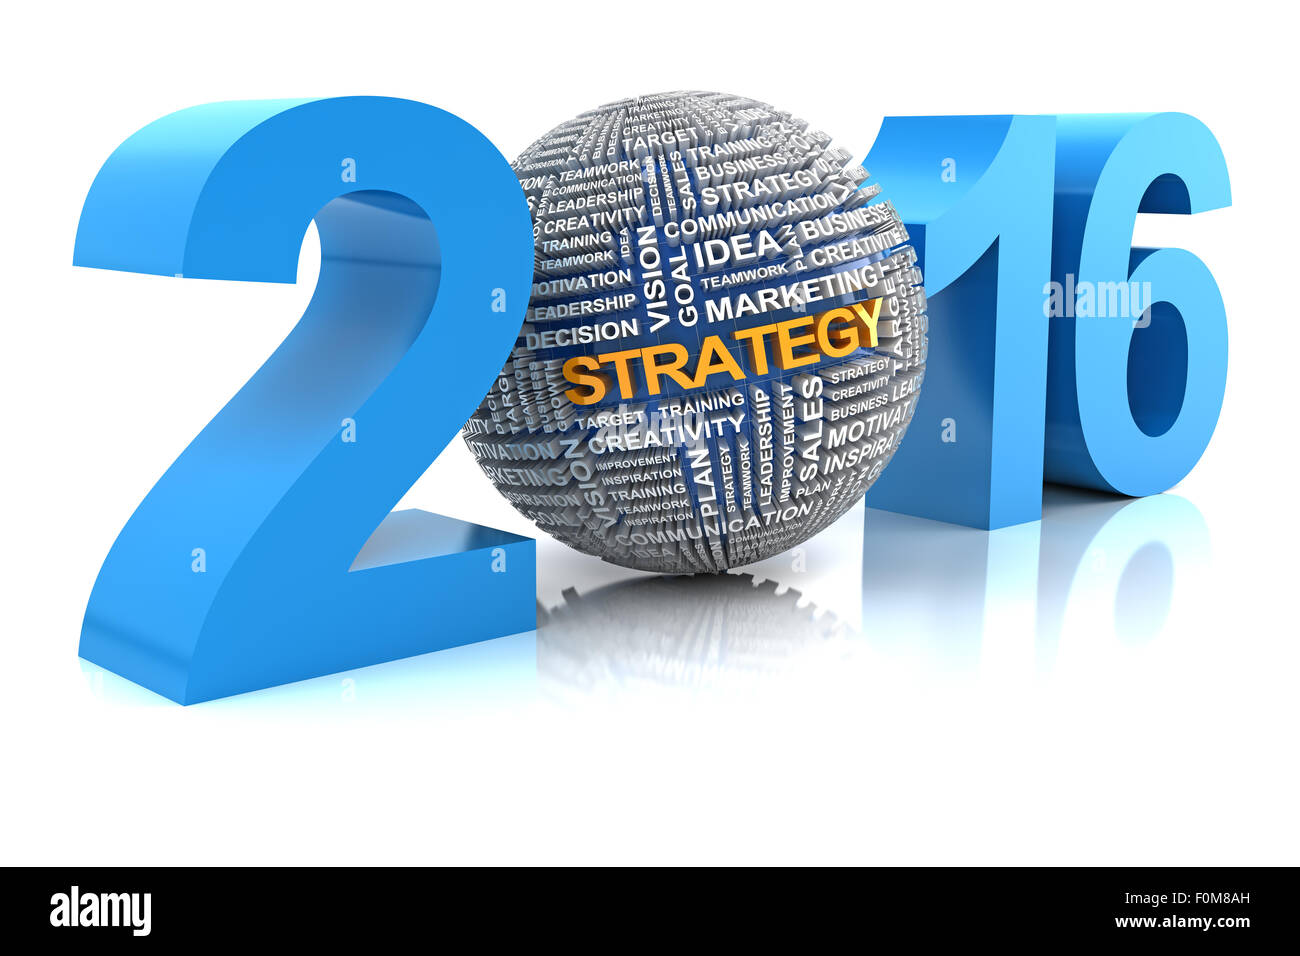 Business strategy in 2016, 3d render Stock Photo